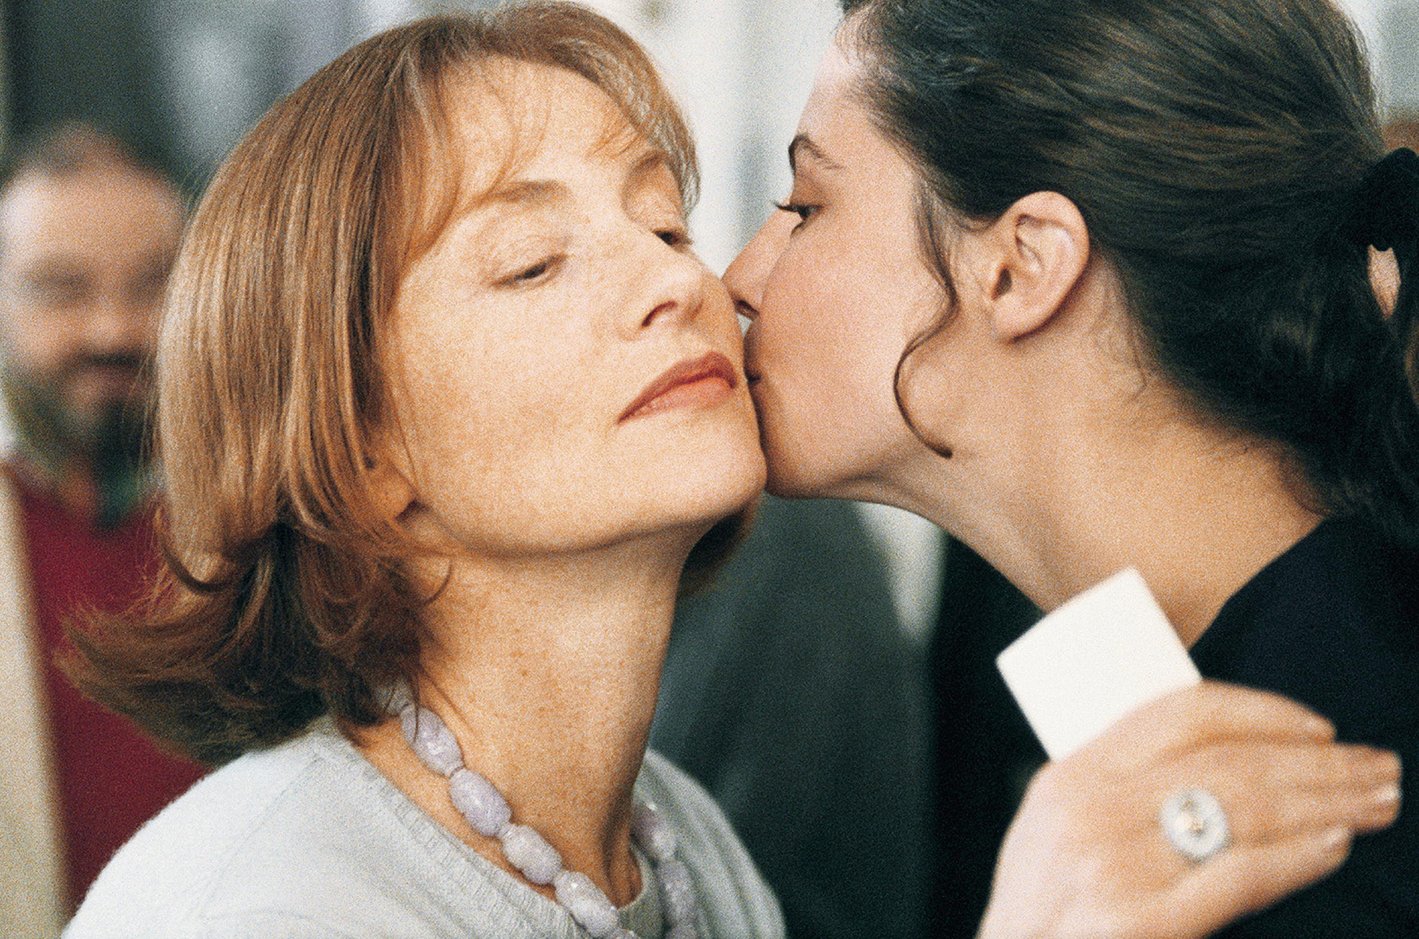 Isabelle Huppert as Mika in Merci, pour le Chocolat (2000)